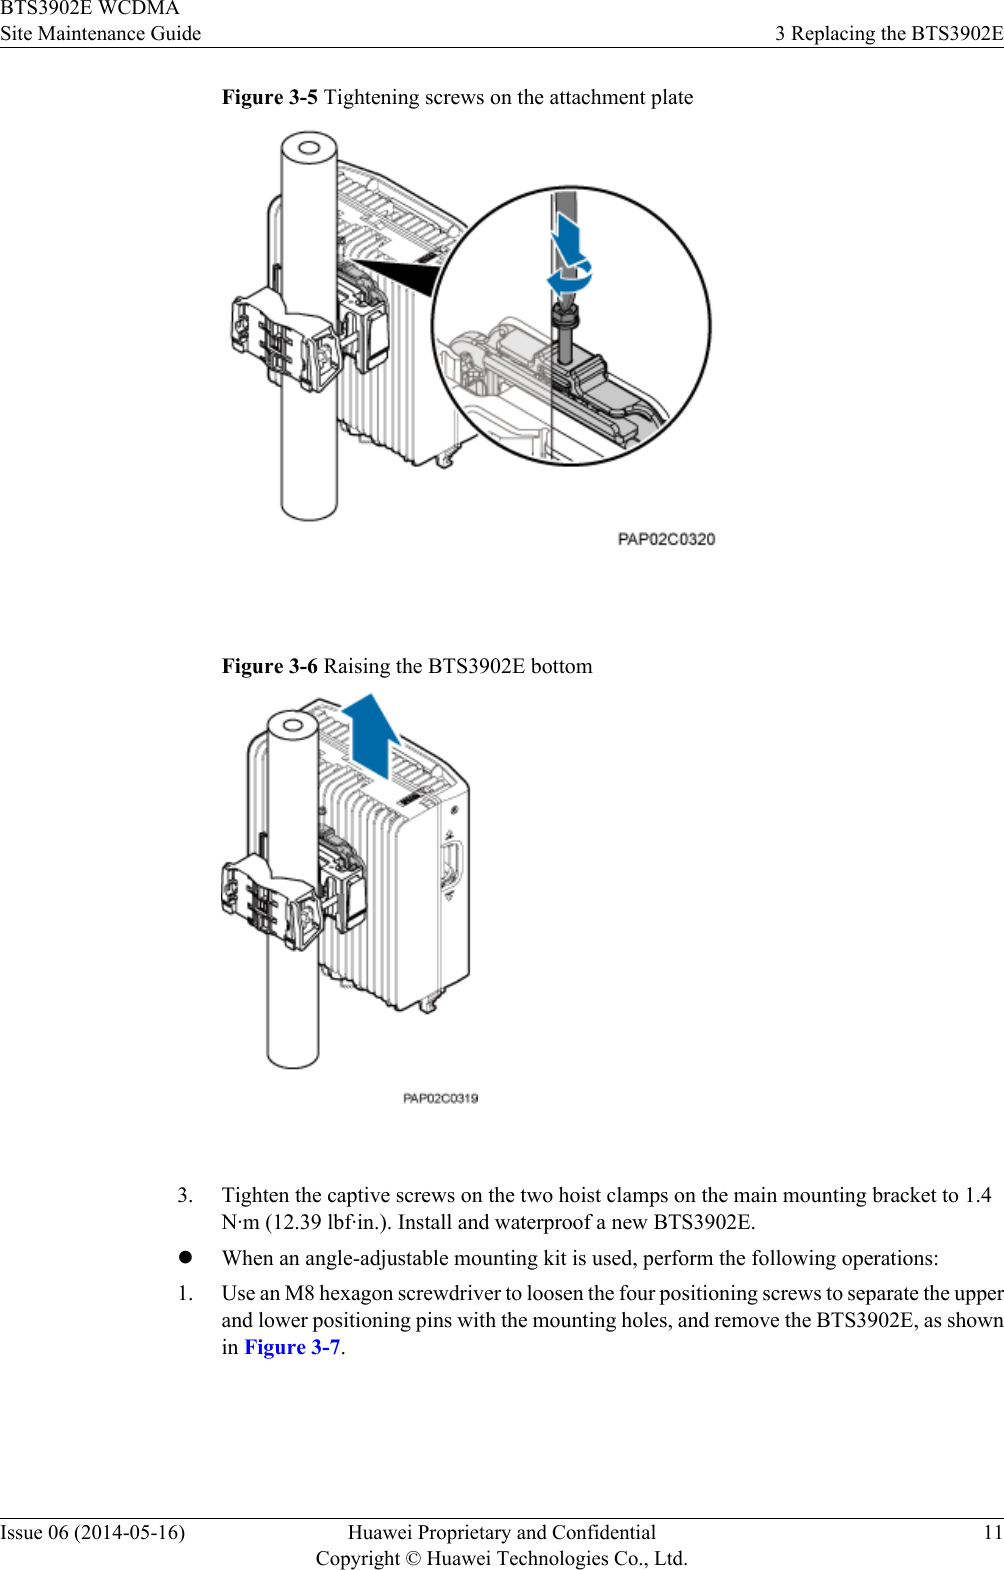 Figure 3-5 Tightening screws on the attachment plate Figure 3-6 Raising the BTS3902E bottom 3. Tighten the captive screws on the two hoist clamps on the main mounting bracket to 1.4N·m (12.39 lbf·in.). Install and waterproof a new BTS3902E.lWhen an angle-adjustable mounting kit is used, perform the following operations:1. Use an M8 hexagon screwdriver to loosen the four positioning screws to separate the upperand lower positioning pins with the mounting holes, and remove the BTS3902E, as shownin Figure 3-7.BTS3902E WCDMASite Maintenance Guide 3 Replacing the BTS3902EIssue 06 (2014-05-16) Huawei Proprietary and ConfidentialCopyright © Huawei Technologies Co., Ltd.11